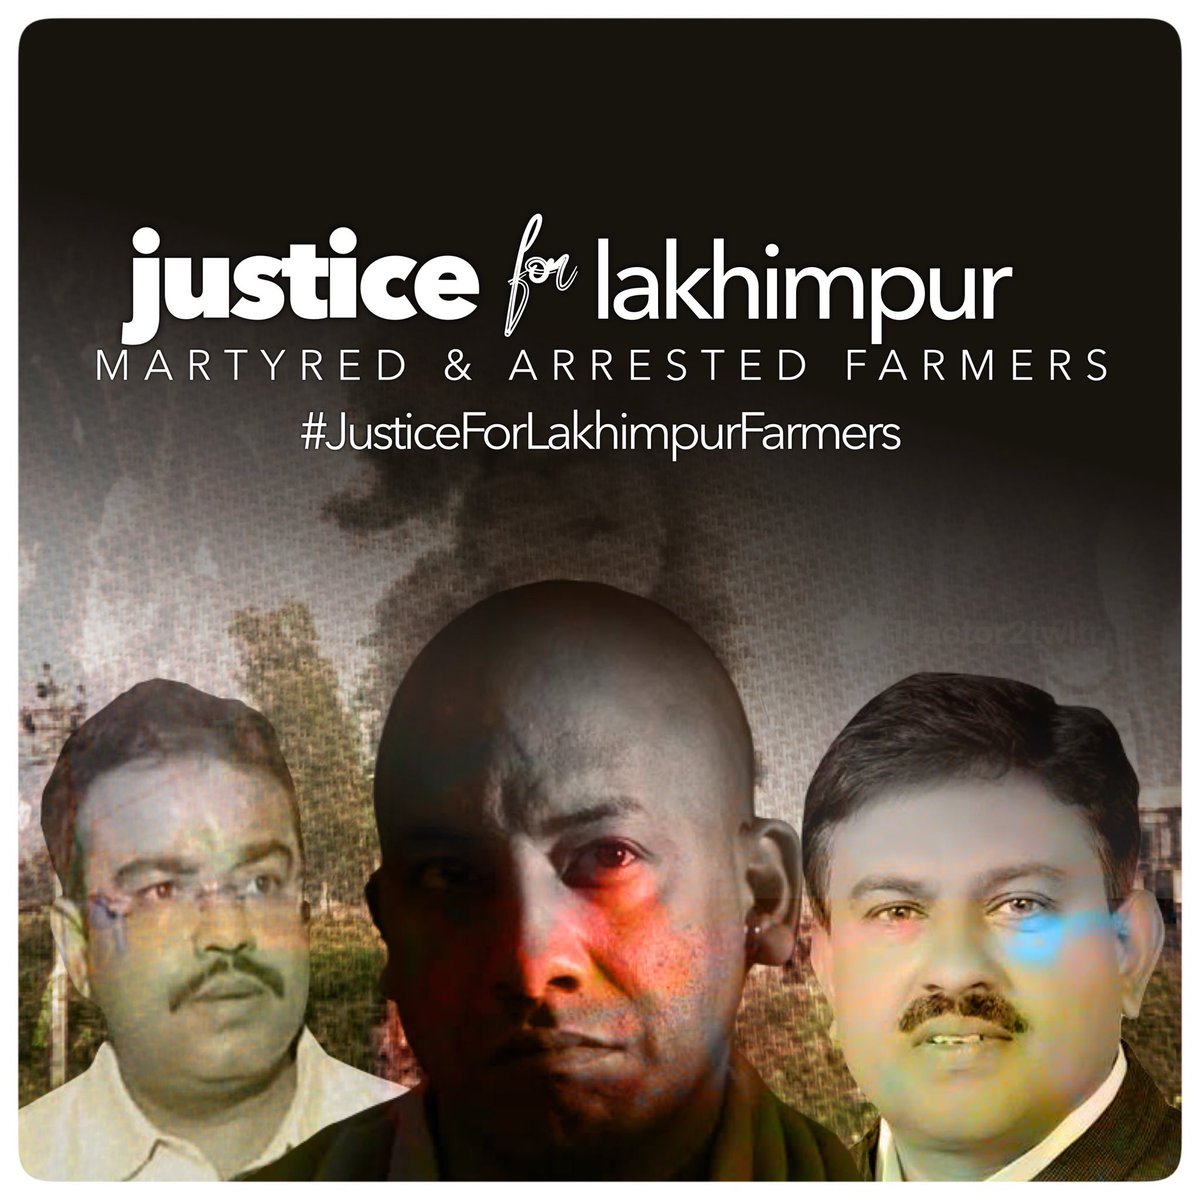 The farmers’ protest is rising every single day. The struggle f the farmers is increasing each day. Innocents are getting attacked, losing lives in the fight to gt bck their right Who s responsible fr these acts?? #JusticeForLakhimpurFarmers